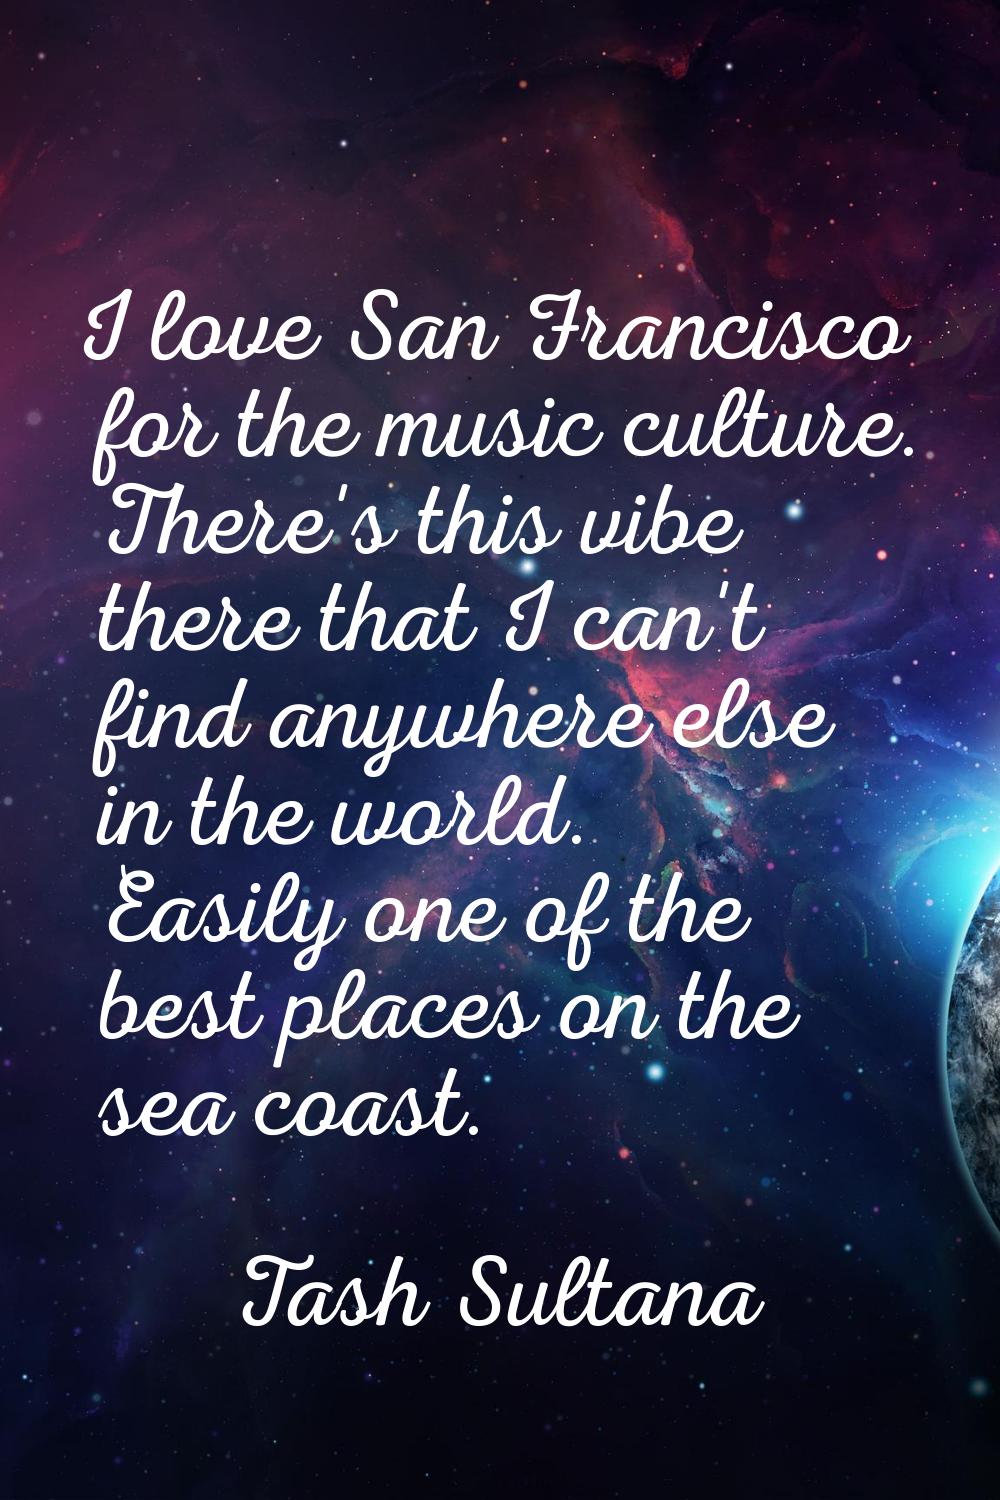 I love San Francisco for the music culture. There's this vibe there that I can't find anywhere else